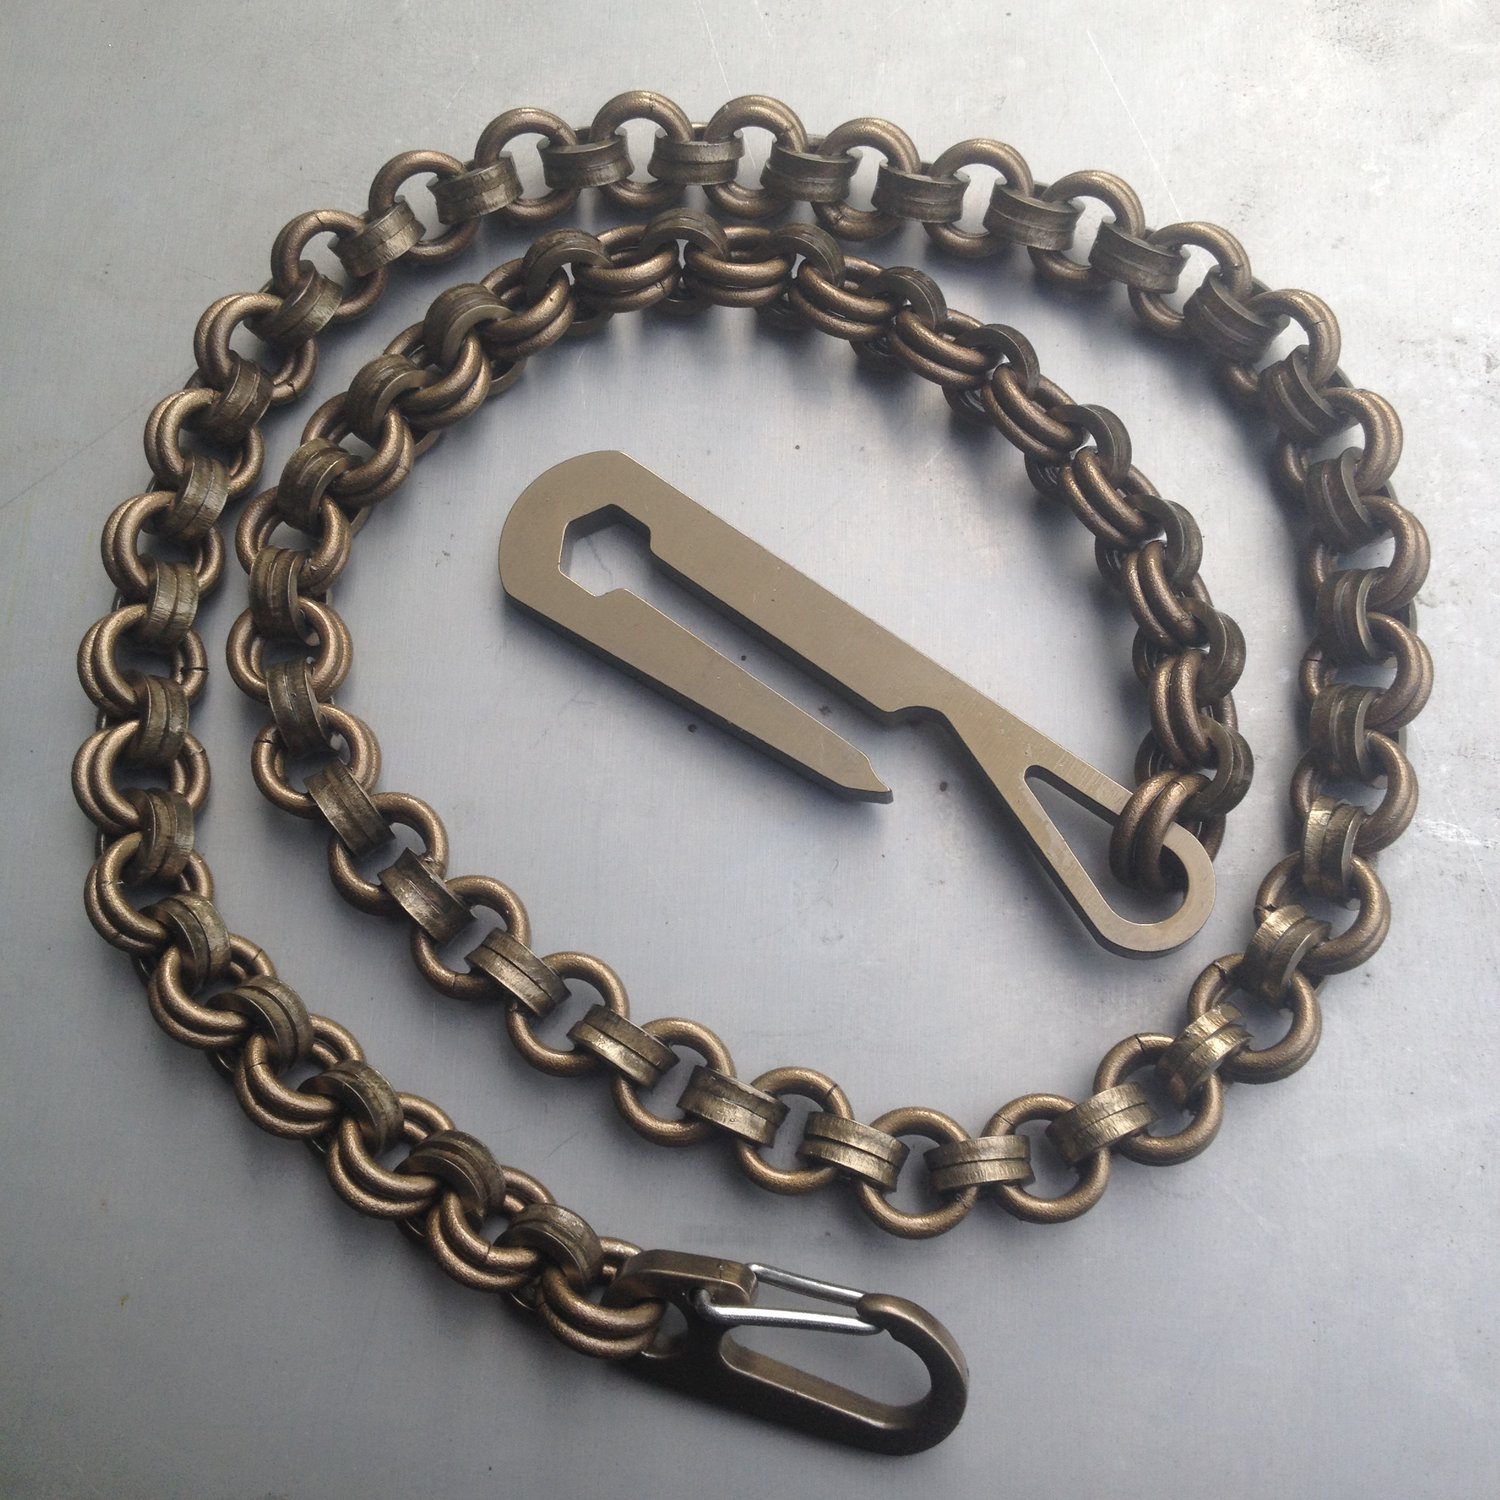 14 Gauge 50/50 Punched and Butted Link Titanium Wallet Chain ...